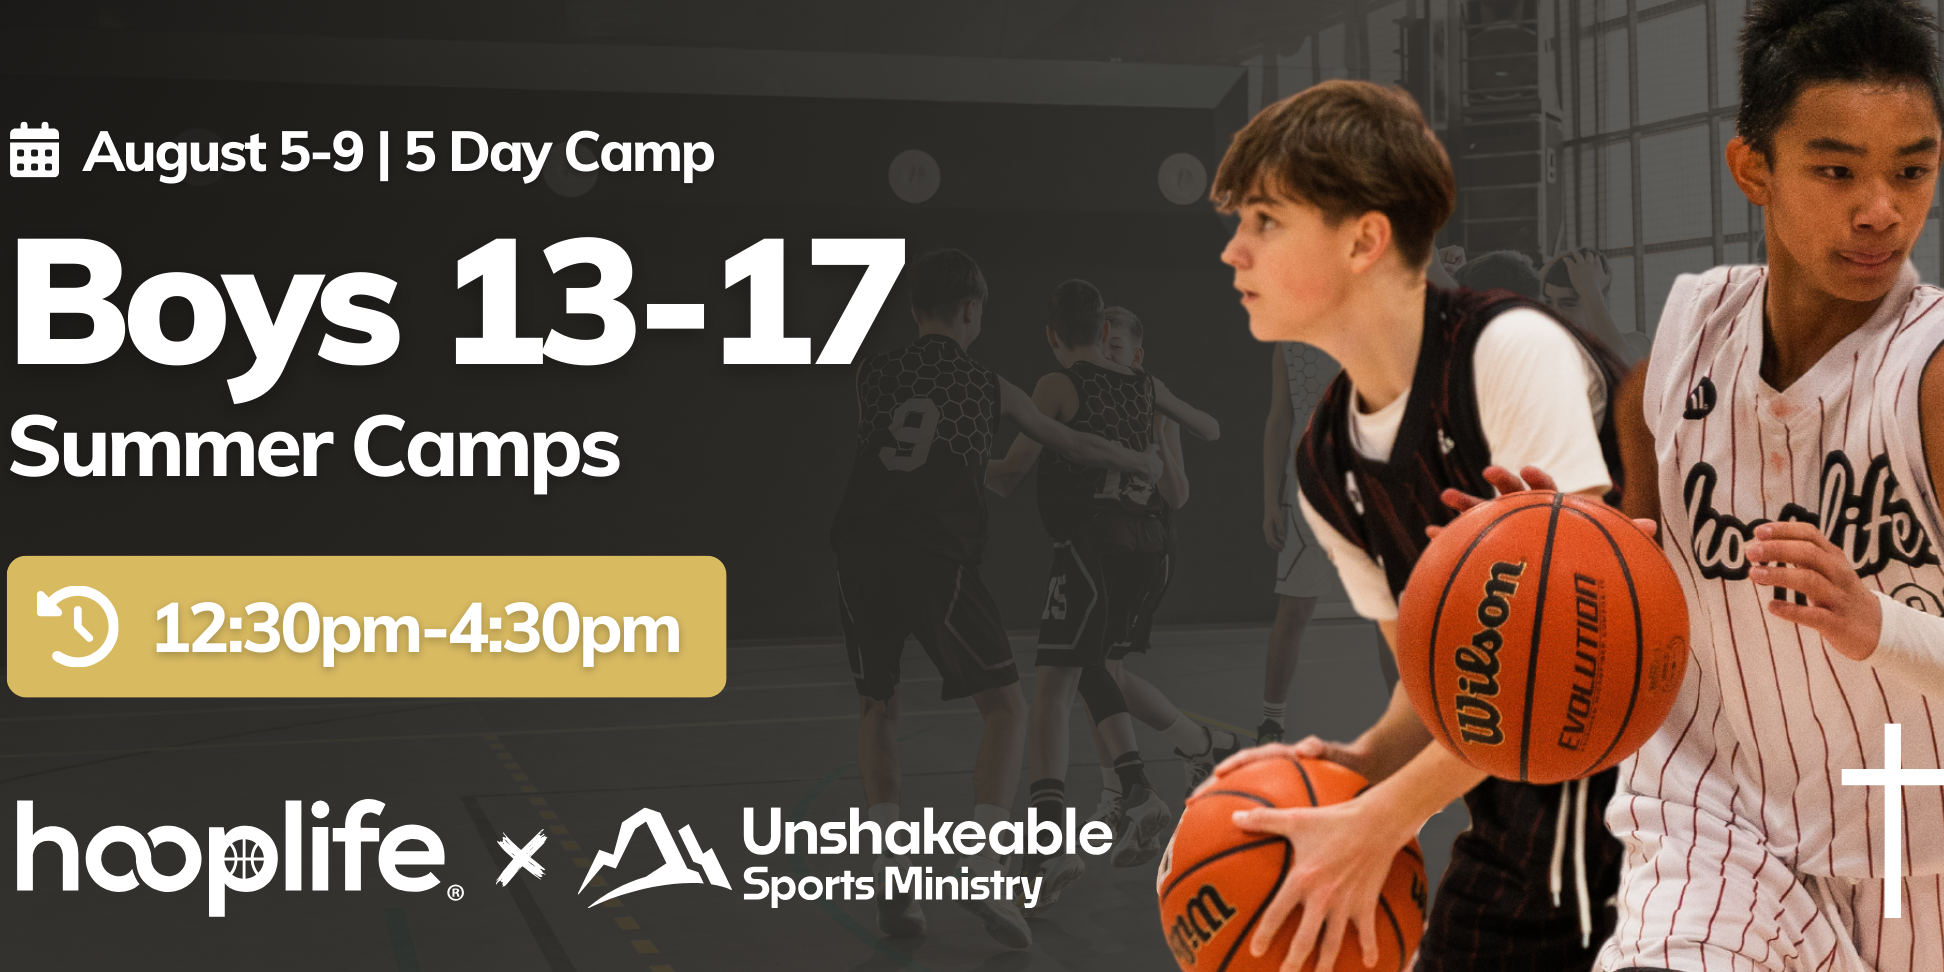 Unshakeable Sports Camp | Boys 13-17 | August 5-9